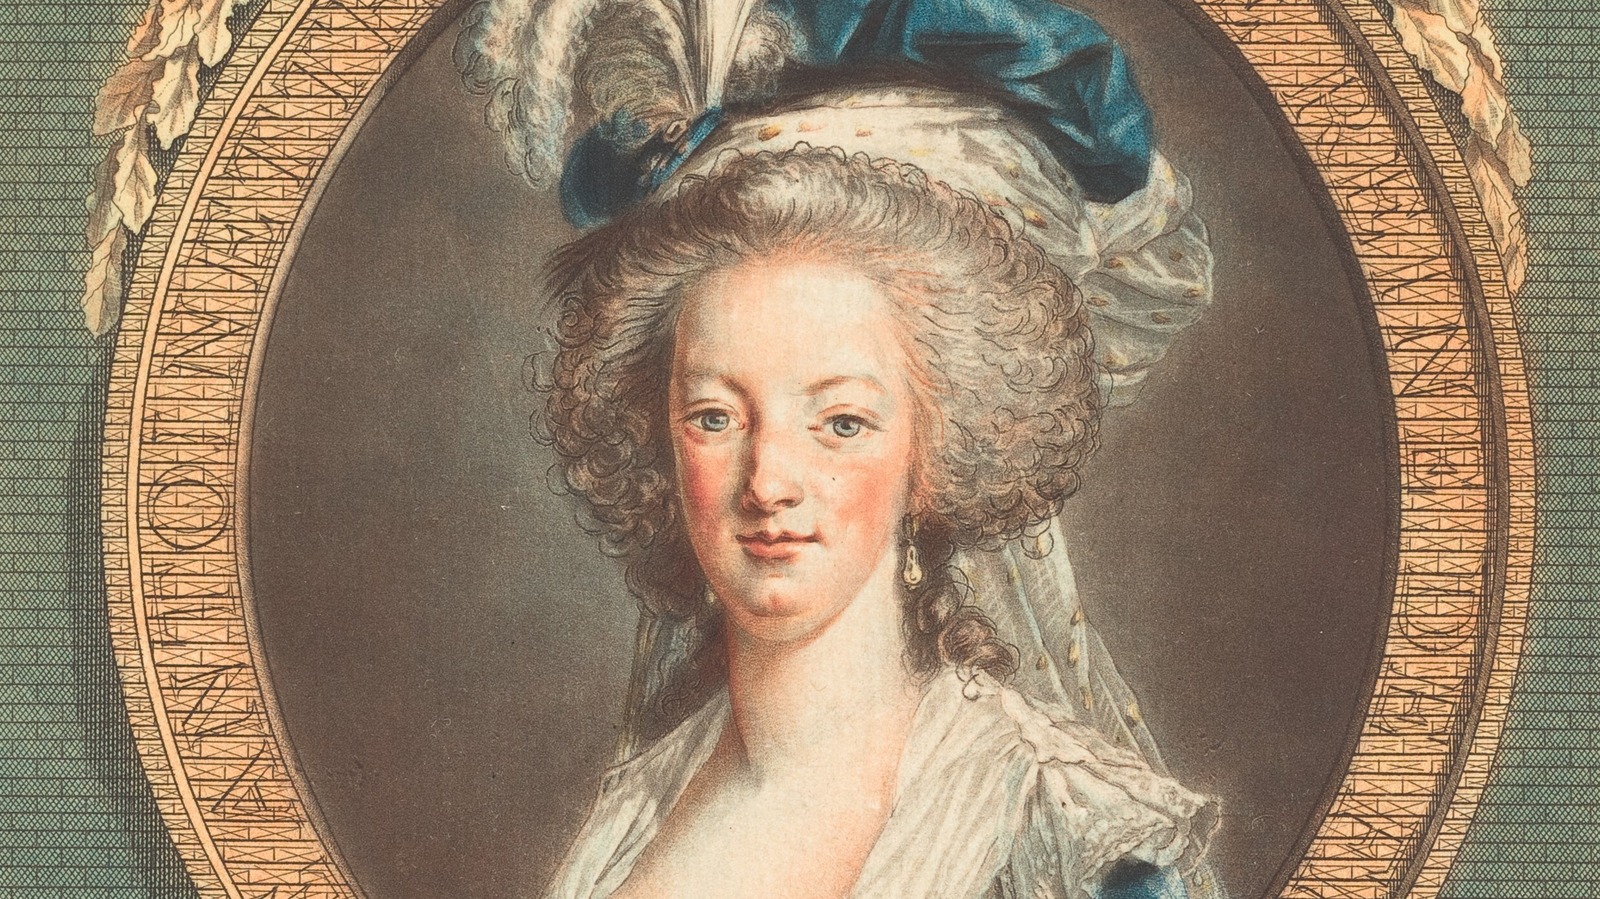 A Guitar Thought To Once Belong To Marie Antoinette Could Be Worth